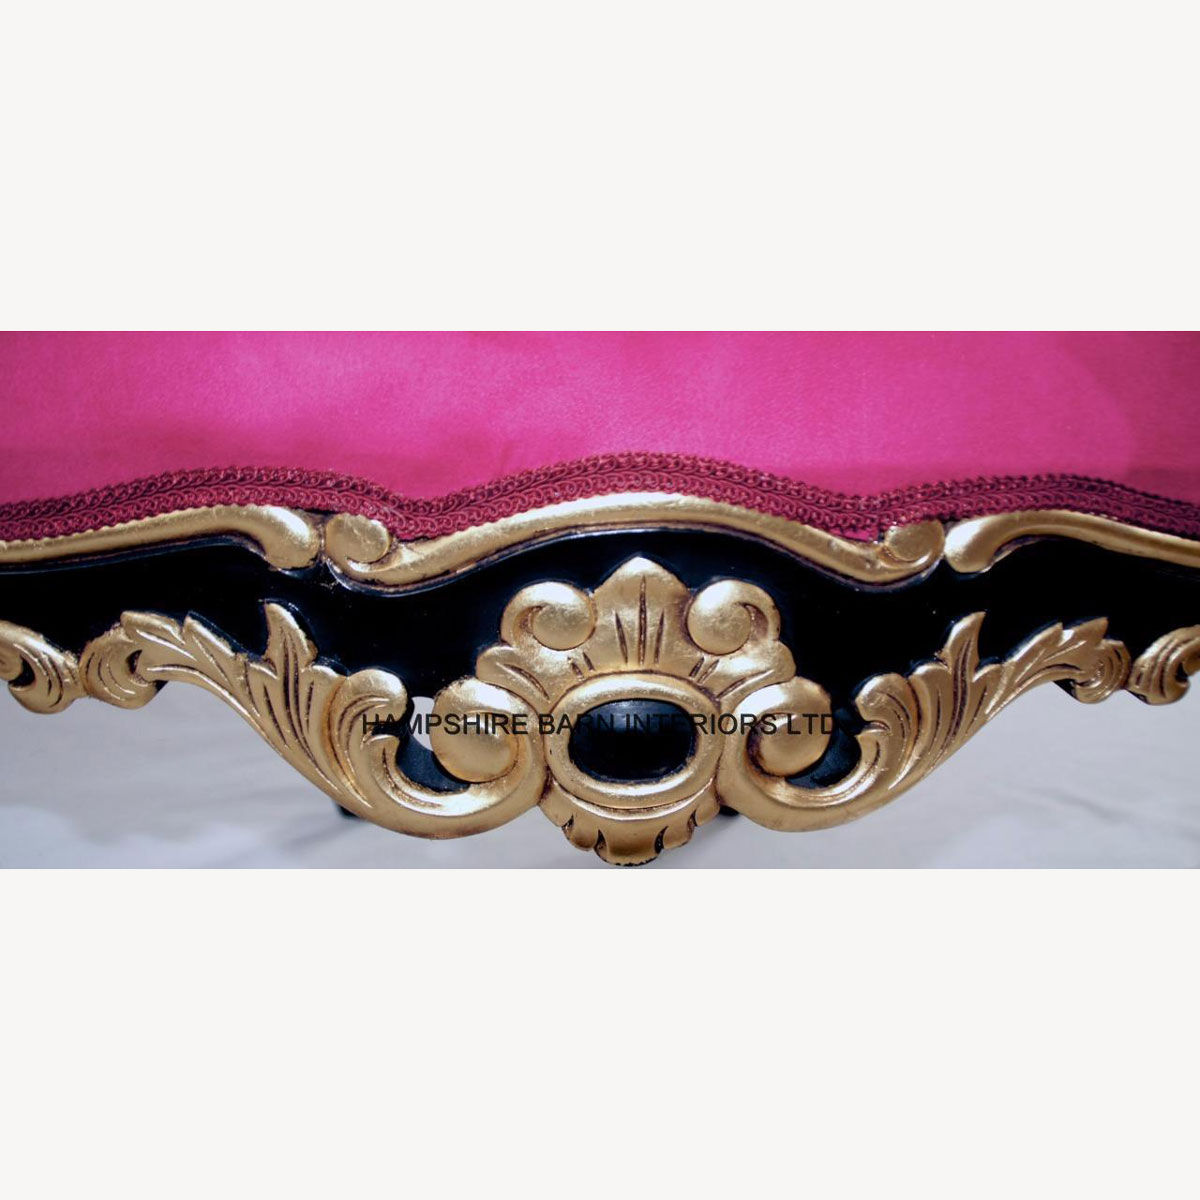 Fuchsia Pink Chair Mayfair Dining Throne Black And Gold Baroque With Crystal Buttons 3 - Hampshire Barn Interiors - Fuchsia Pink Chair Mayfair Dining Throne Black And Gold Baroque With Crystal Buttons -